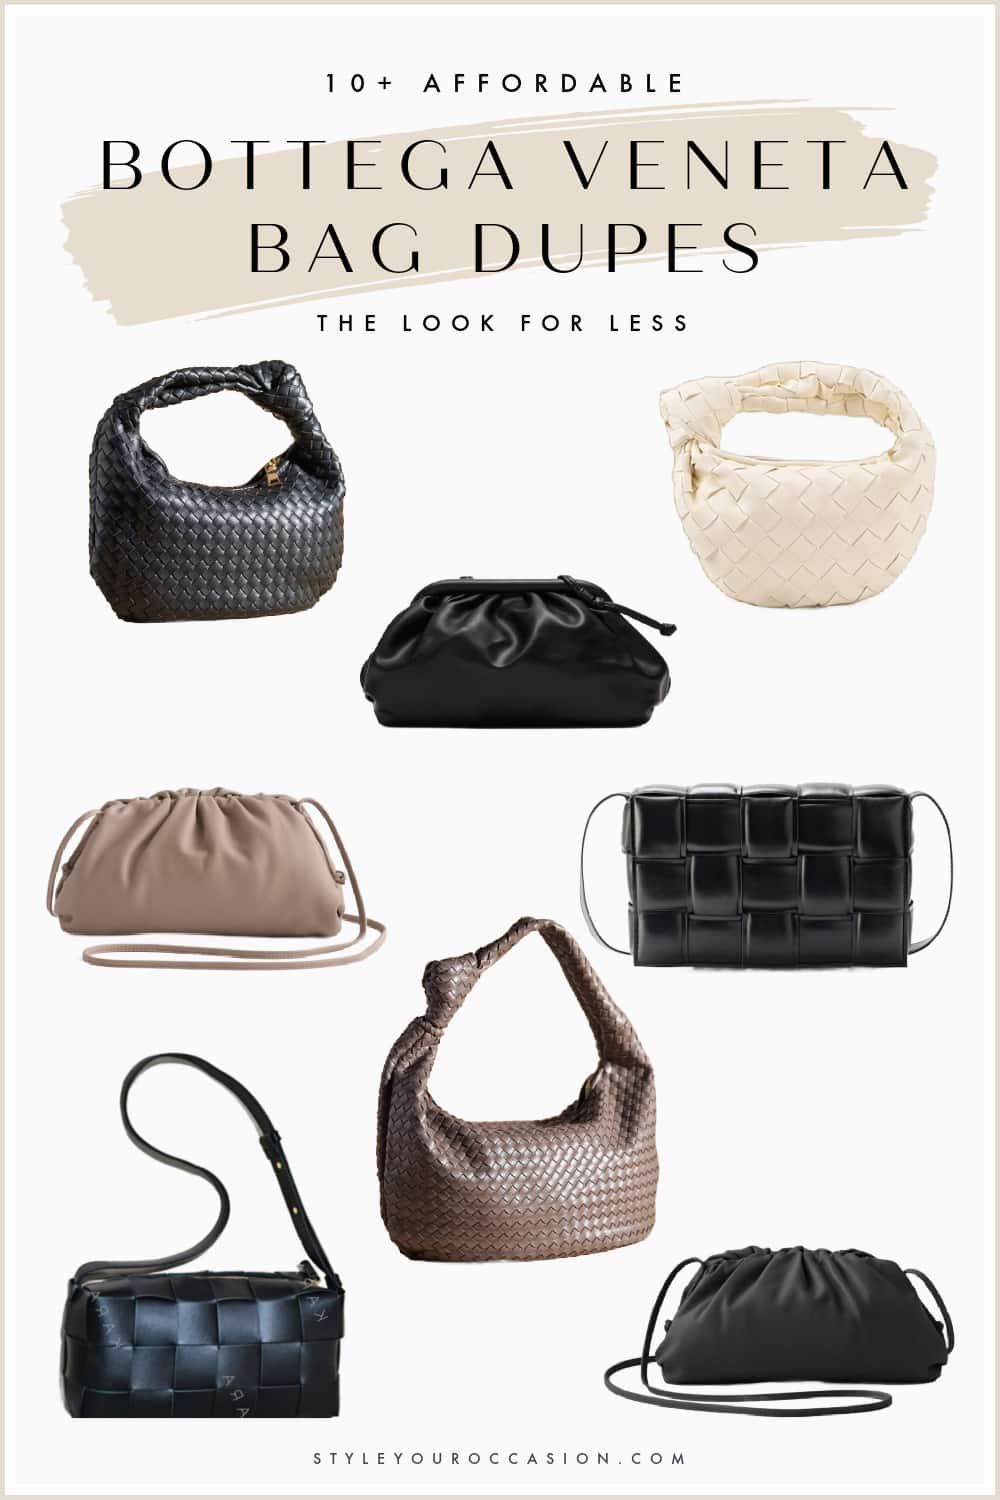 collage of 8 different bags that are dupes of the Bottega Veneta Cassette, Jodie, and Pouch bags